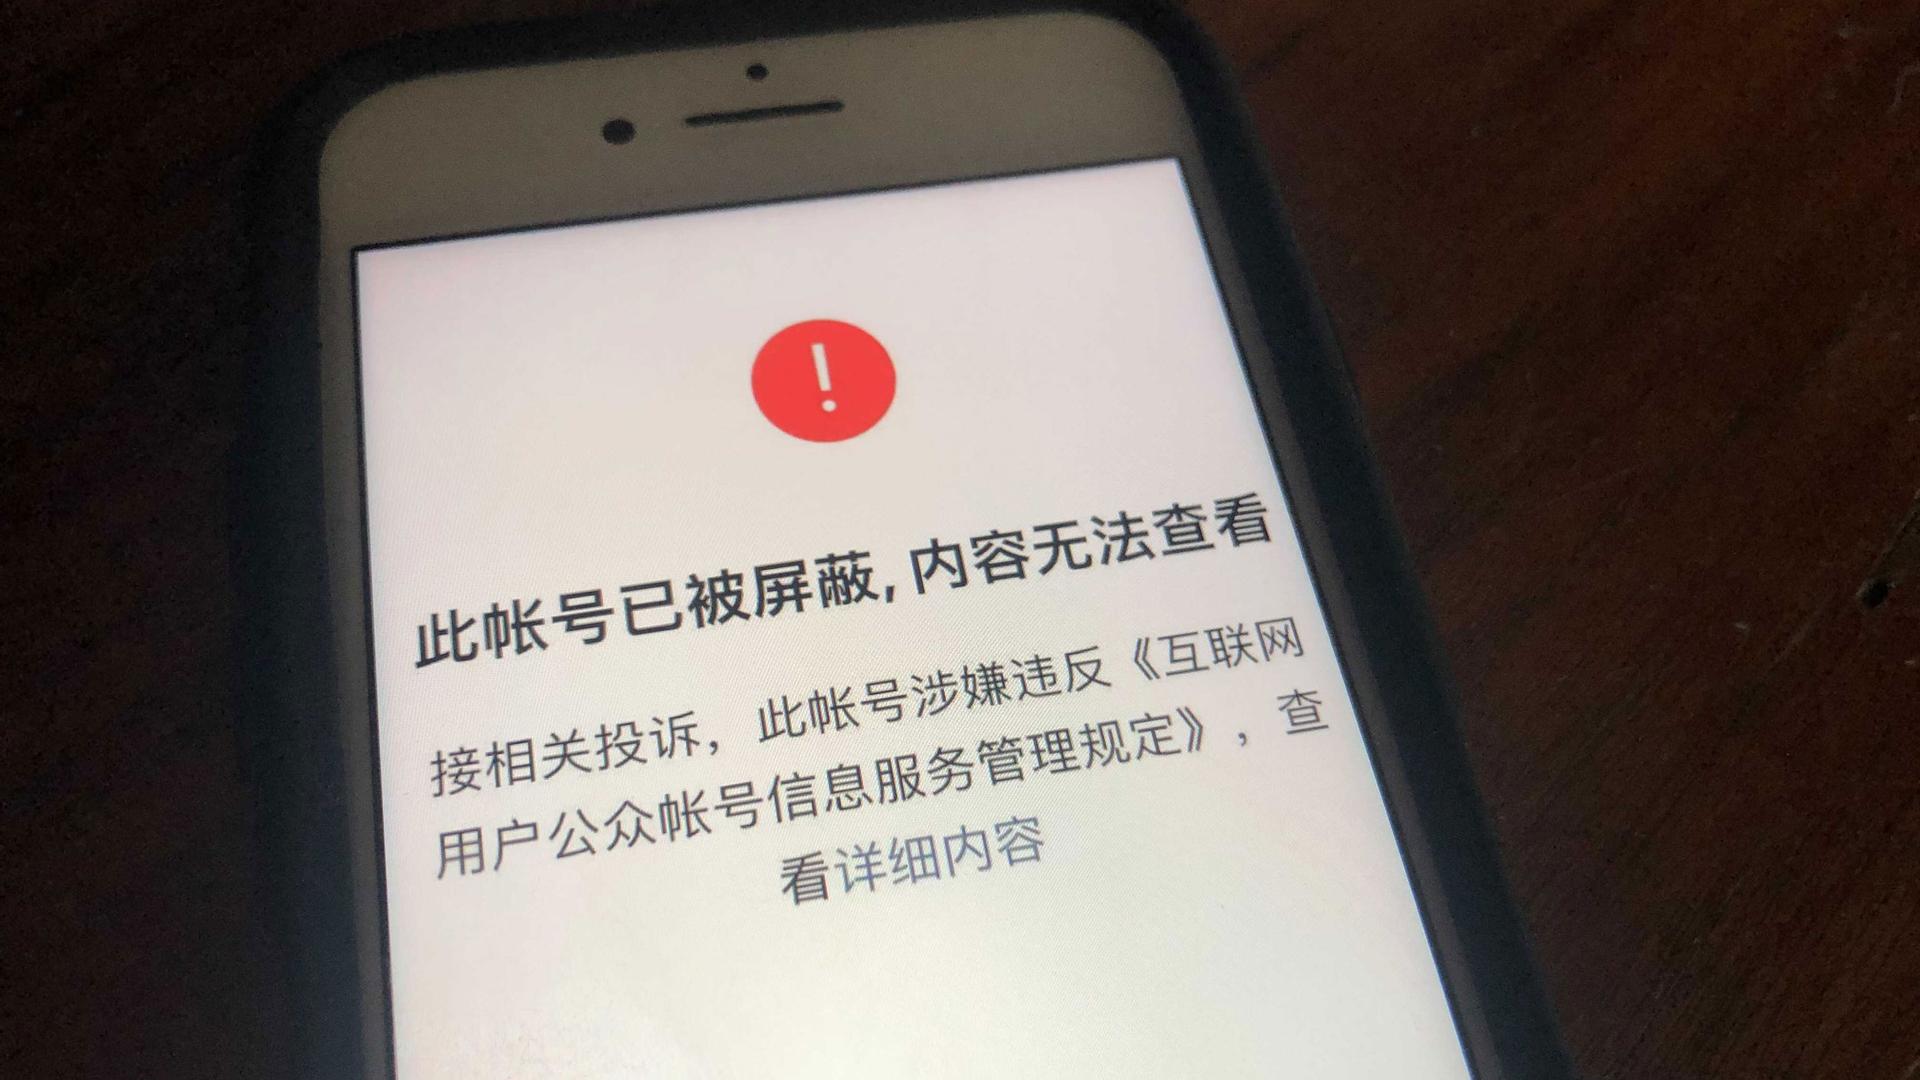 Social media accounts of LGBTQ student groups and feminist activists have been shut down in China.